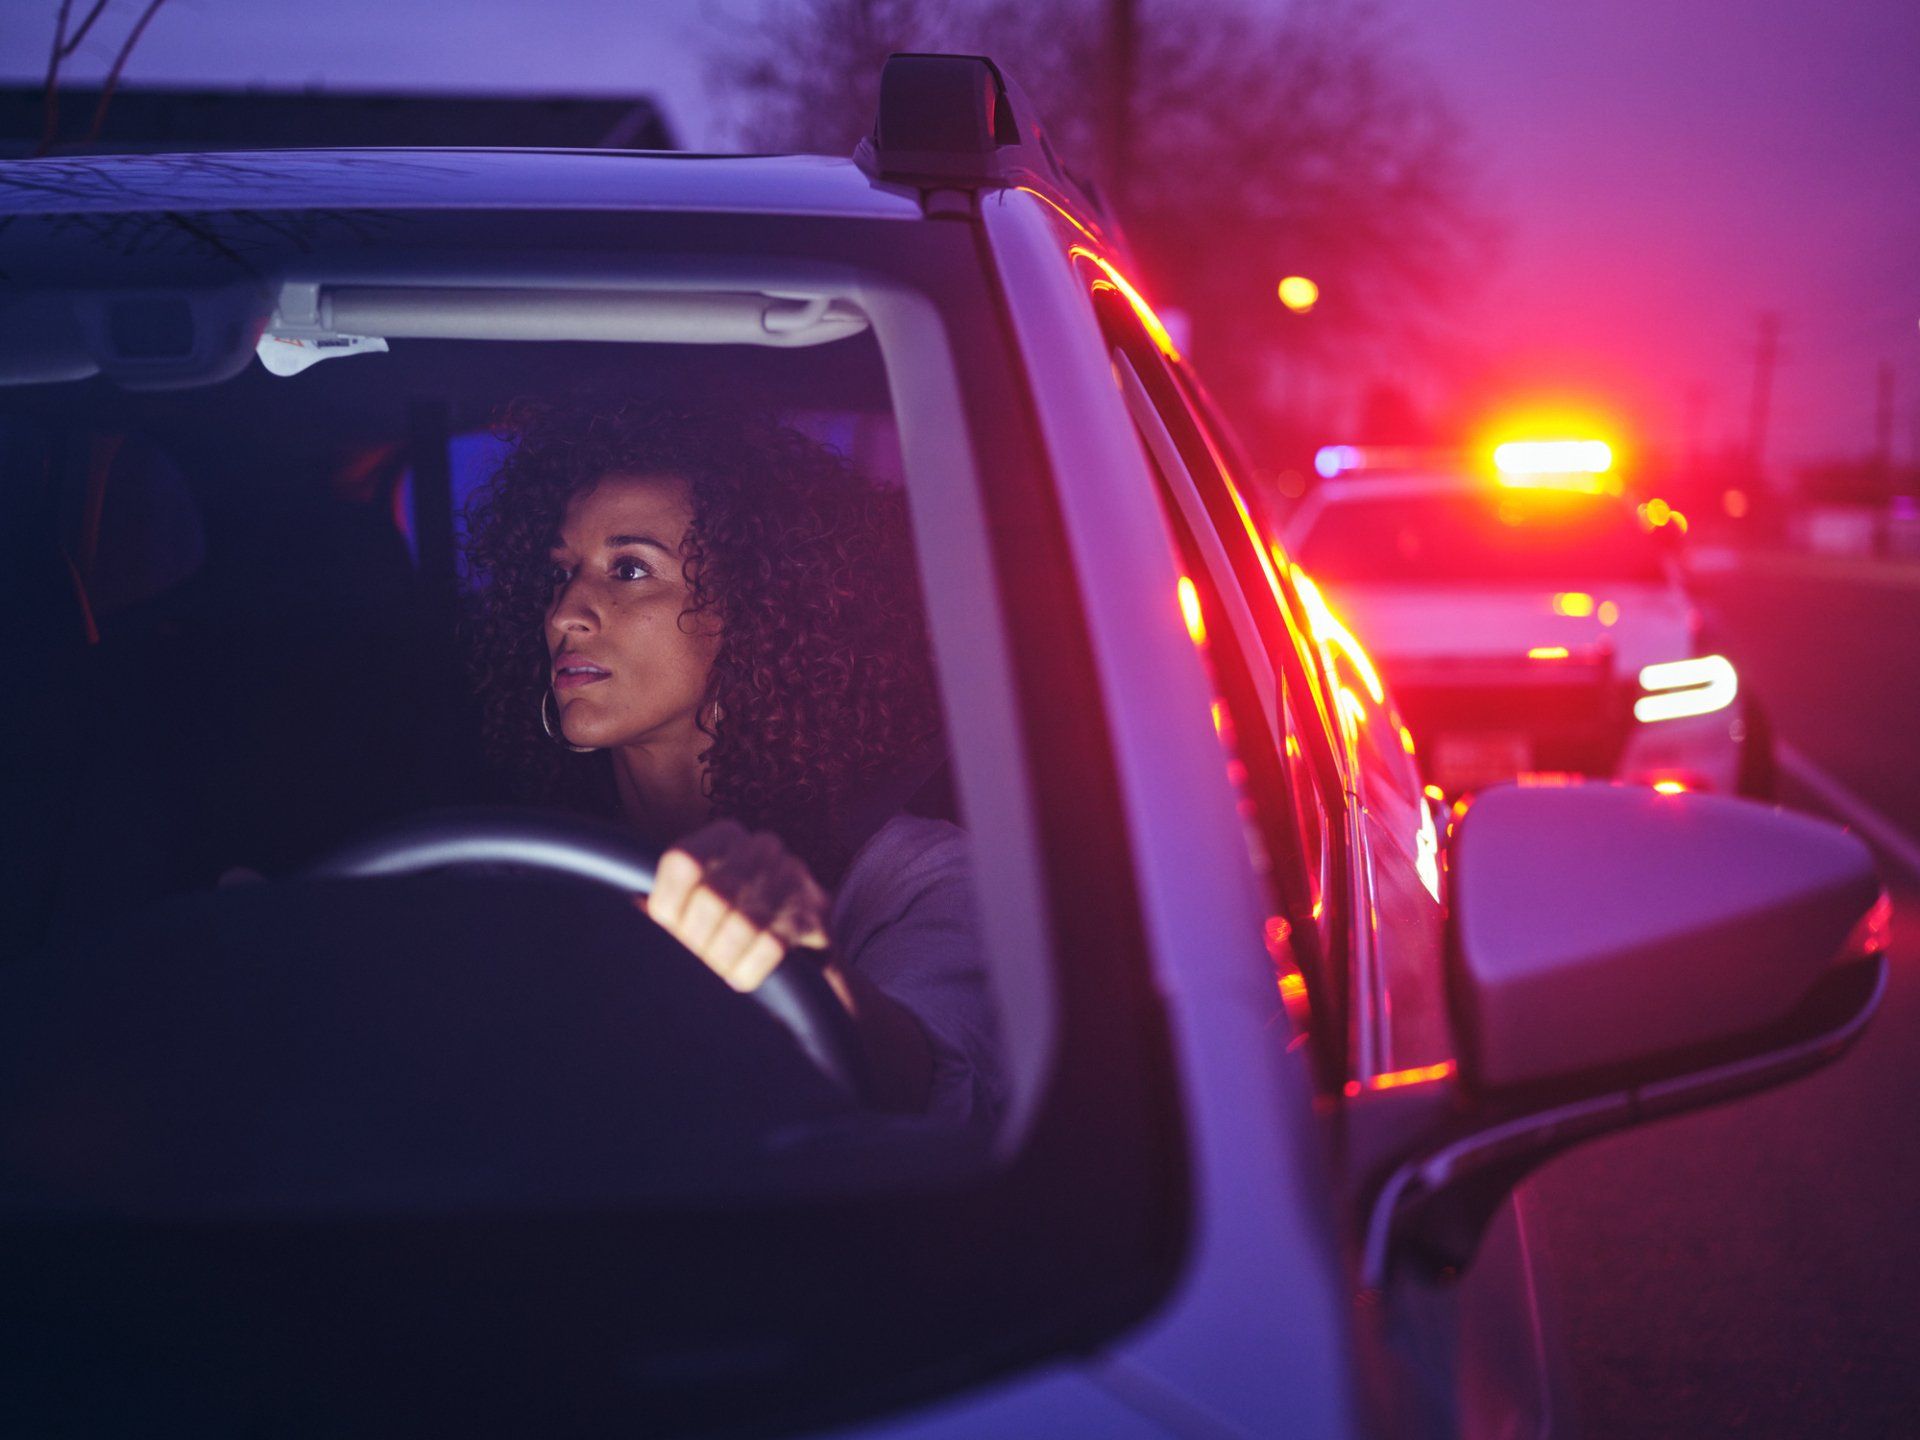 A person who may need a DUI lawyer serving Beavercreek, OH